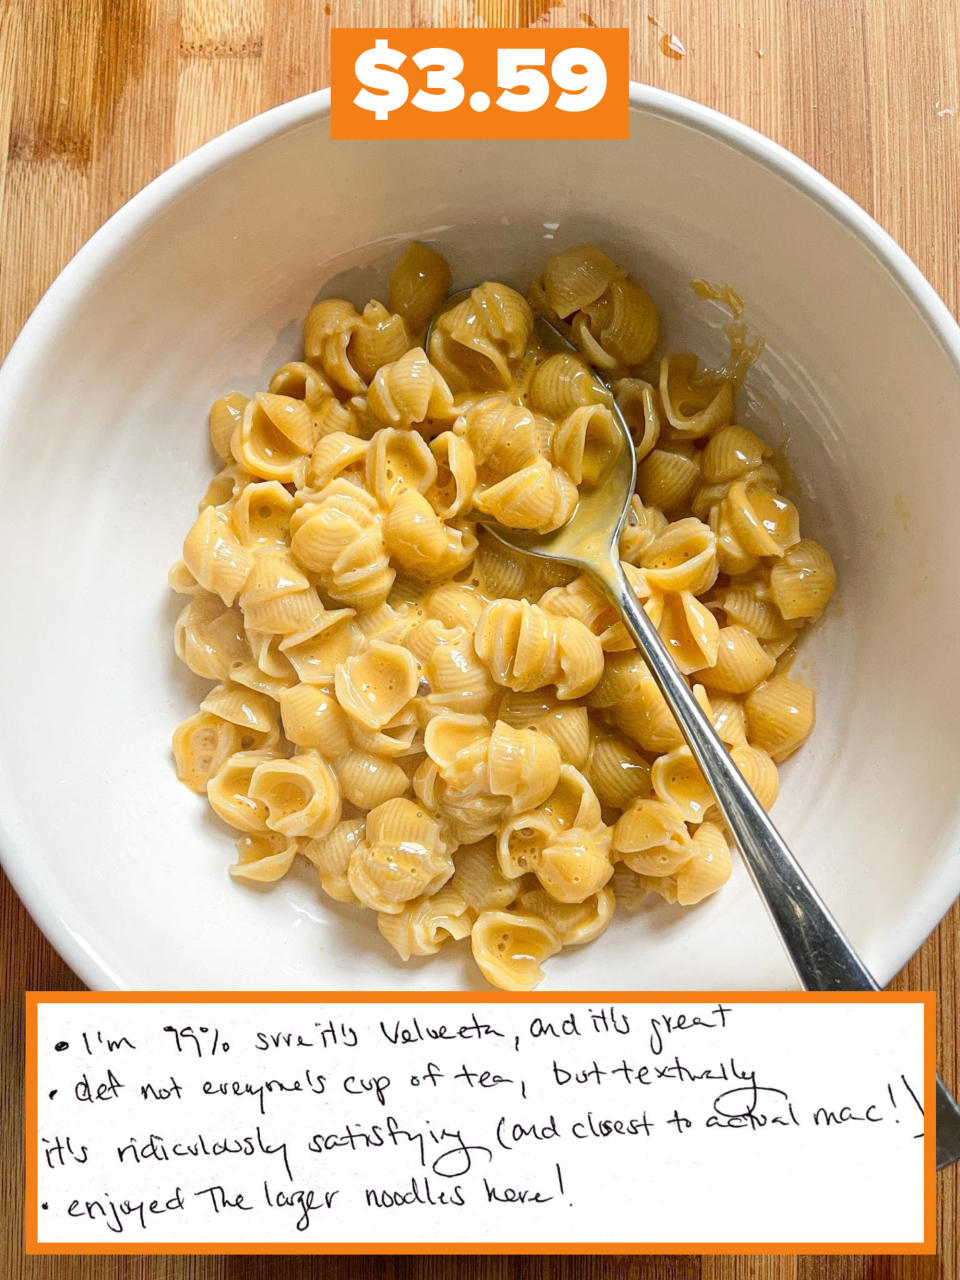 Cost: $3.59; Author's handwritten notes at the bottom, including "I'm 99% sure this is Velveeta, and it's great"